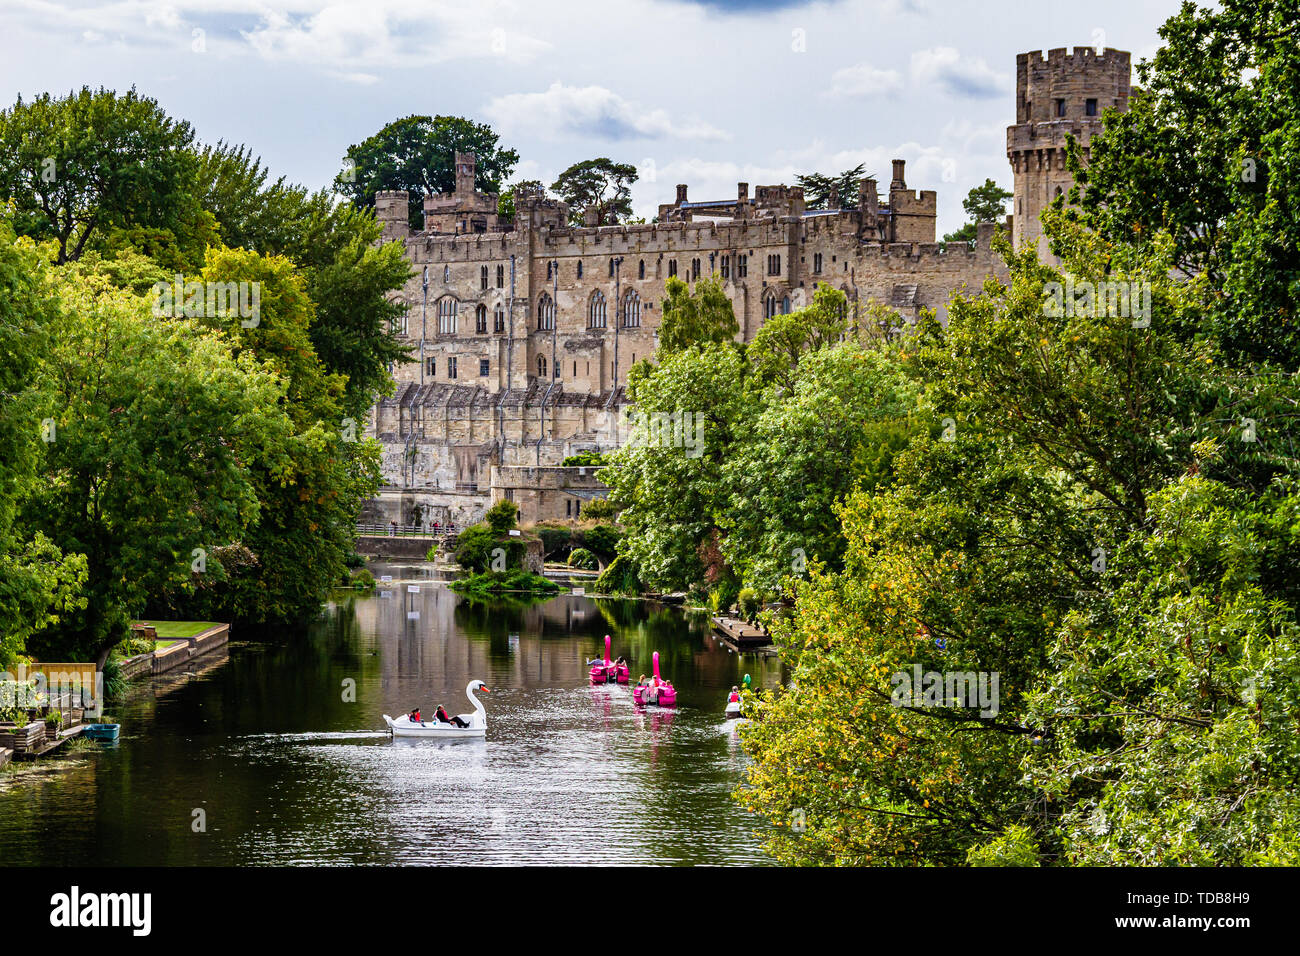 Warwick Castle with tourists in hire boats on the River Avon. Warwick, Warwickshire, UK. Summer 2018. Stock Photo